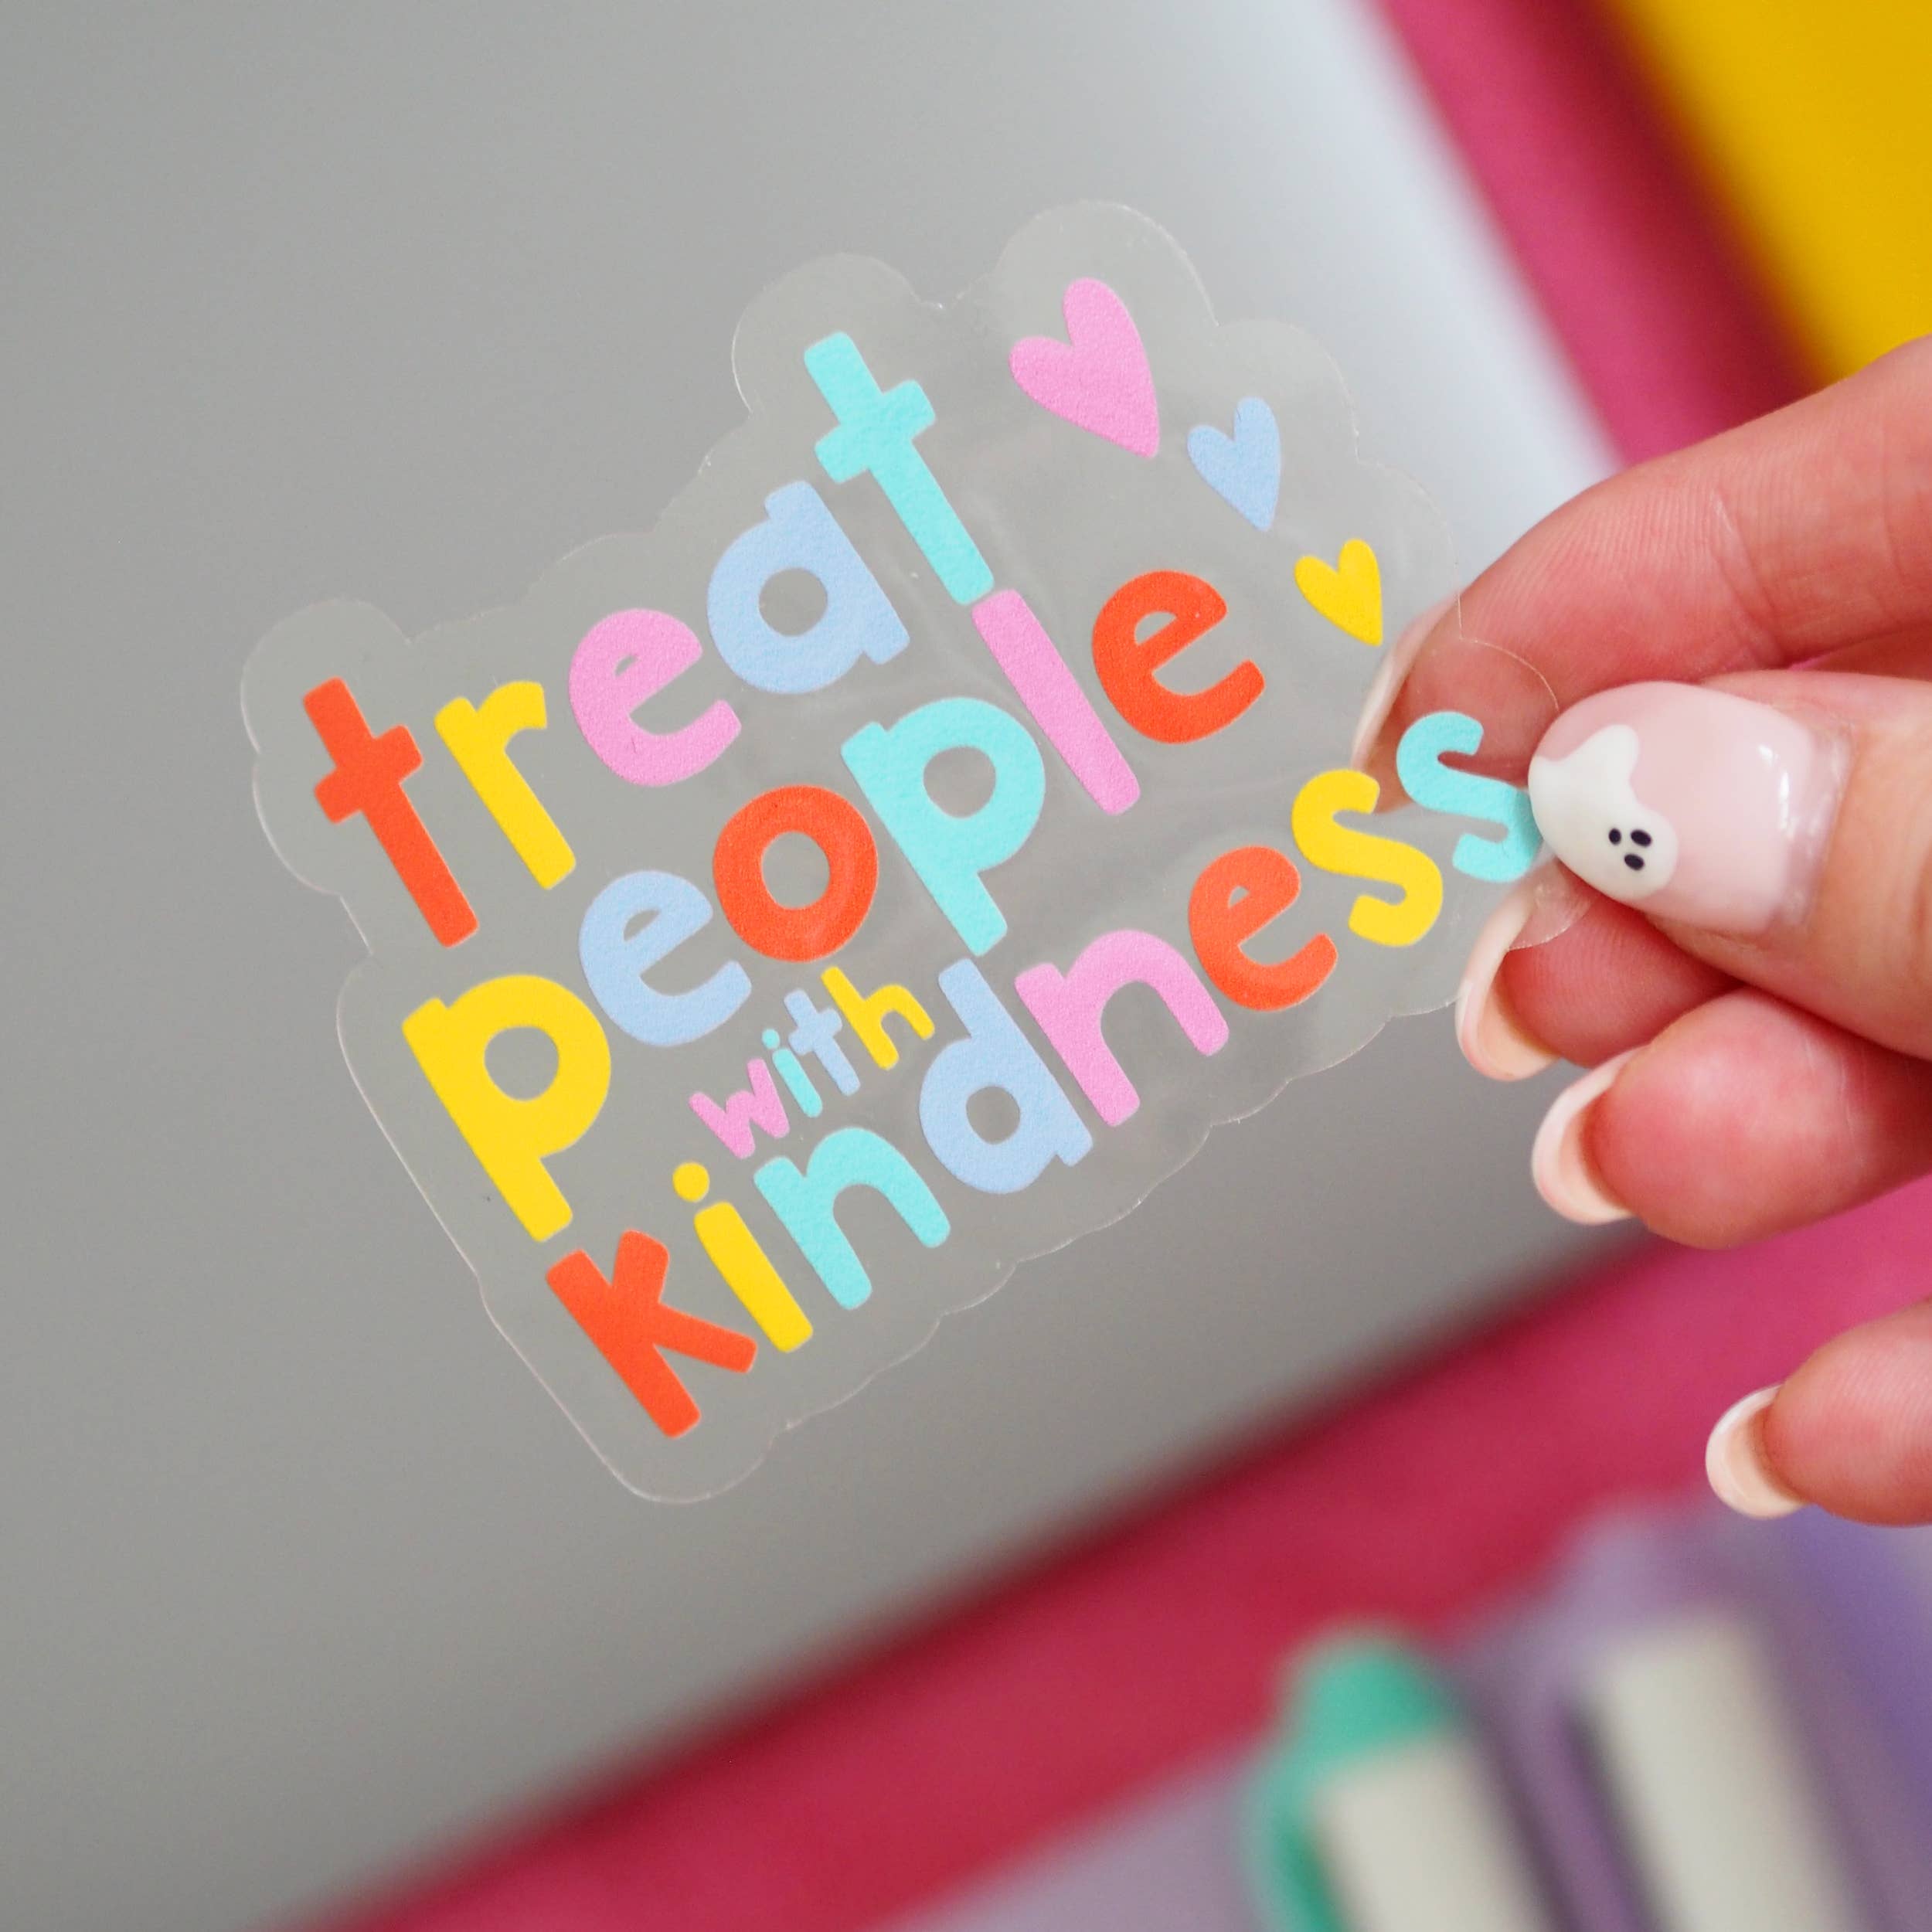 Treat People with Kindness Sticker - Pink – Golden Hour Press Co.